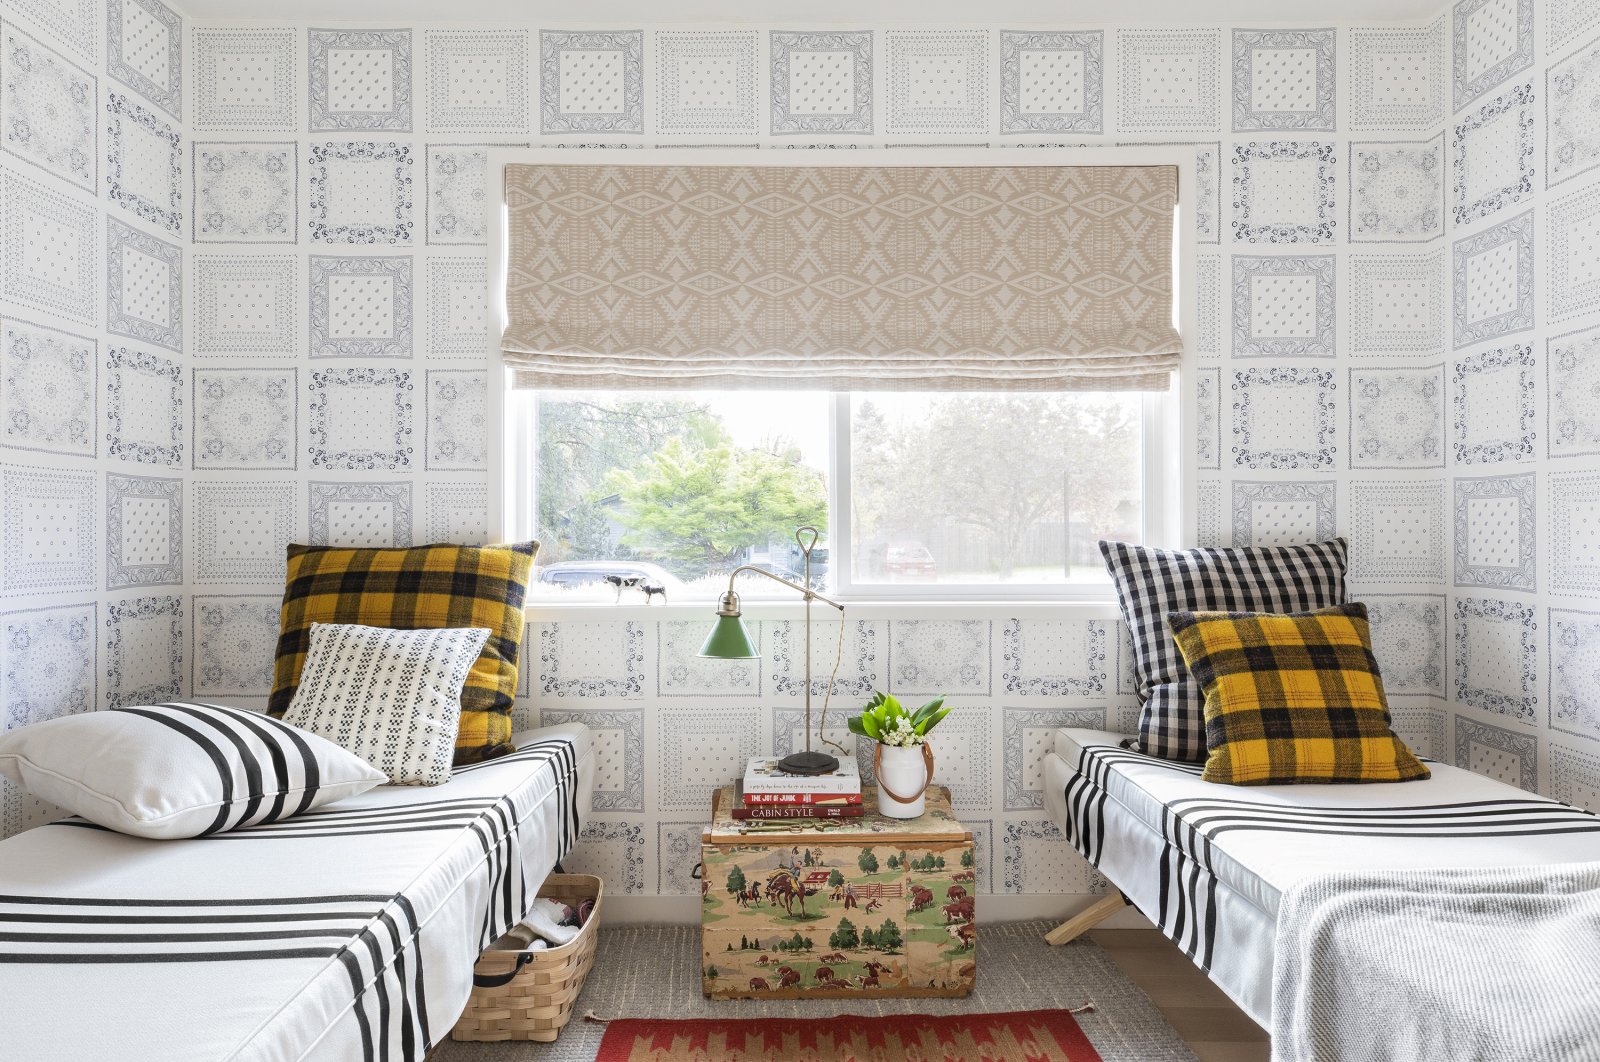 This image released by Portland Oregon-based interior designer Max Humphrey shows a room with a wallpaper design inspired by bandanas. (Christopher Dibble via AP)